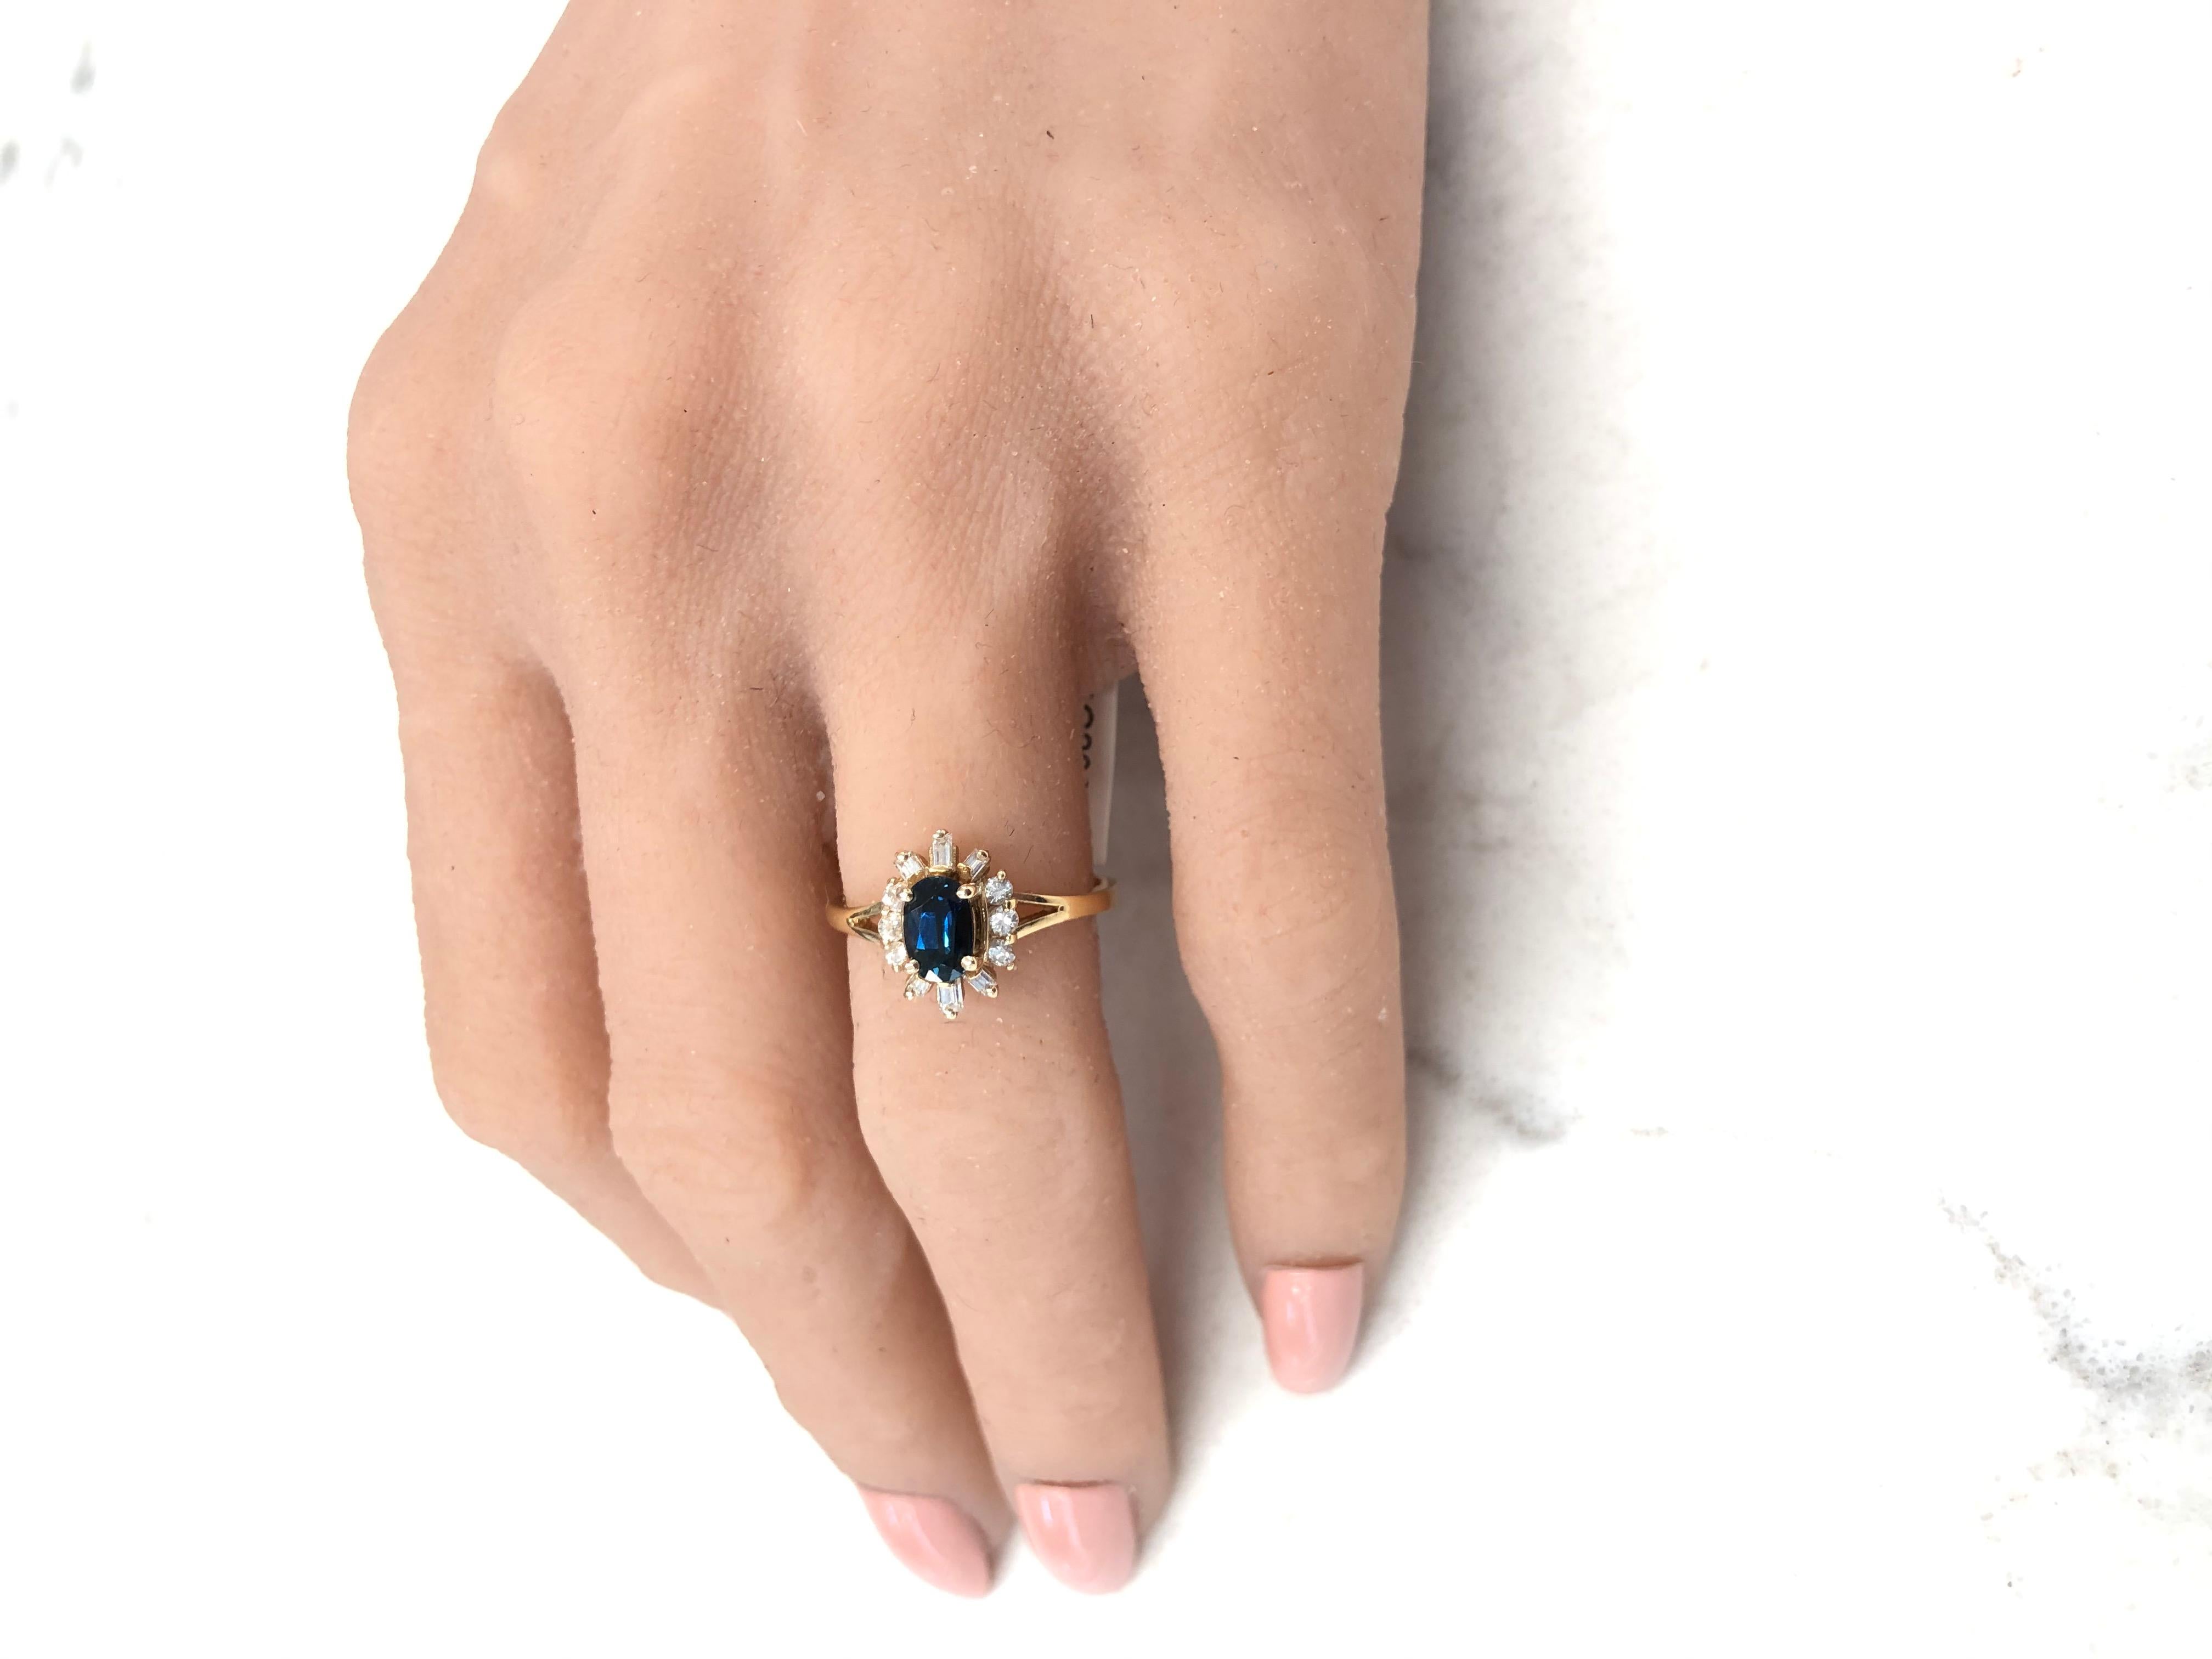 This brightly polished 14 karat yellow gold cocktail ring features a 0.59 carat sapphire in the center that exhibits an intense blue hue with overall excellent color saturation. This sapphire is complemented by 0.31 carats of round brilliant and